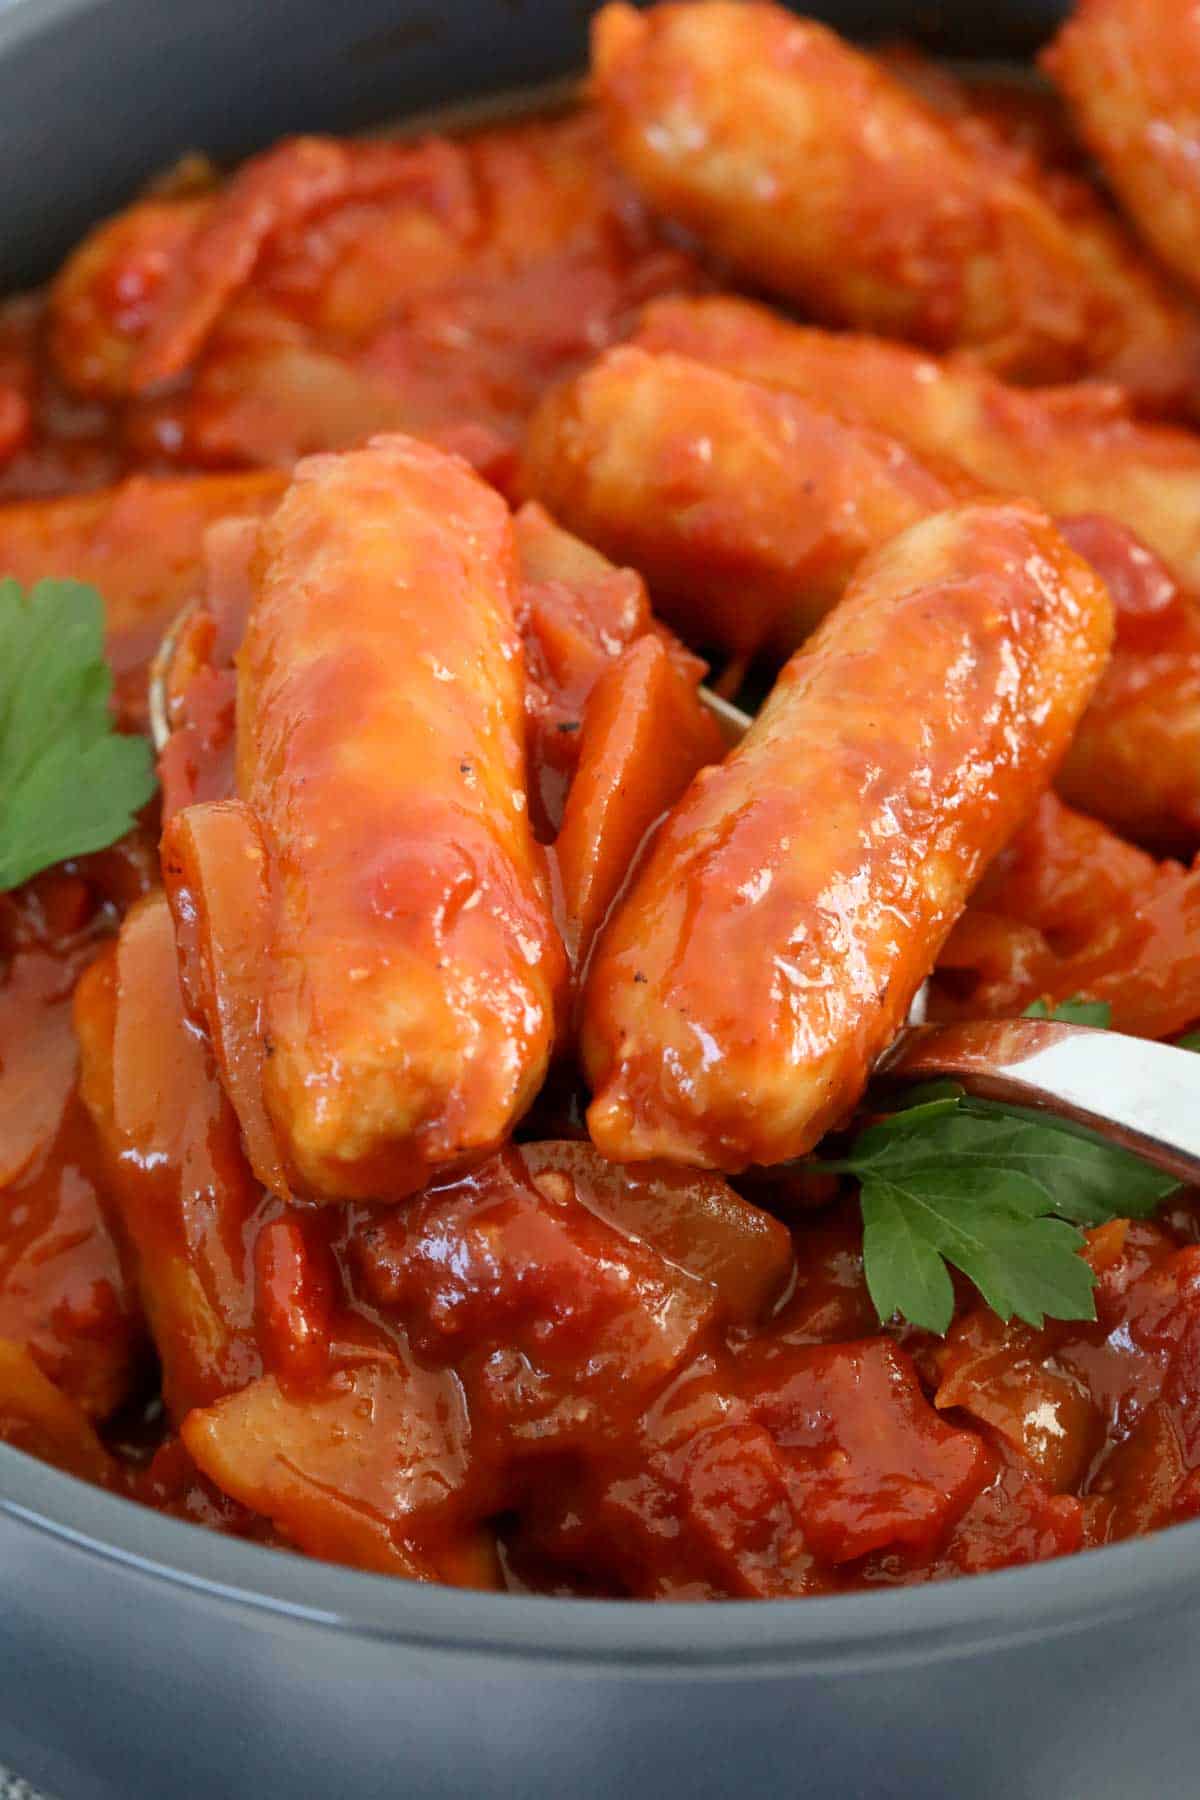 Chipolatas in a tomato based sauce.